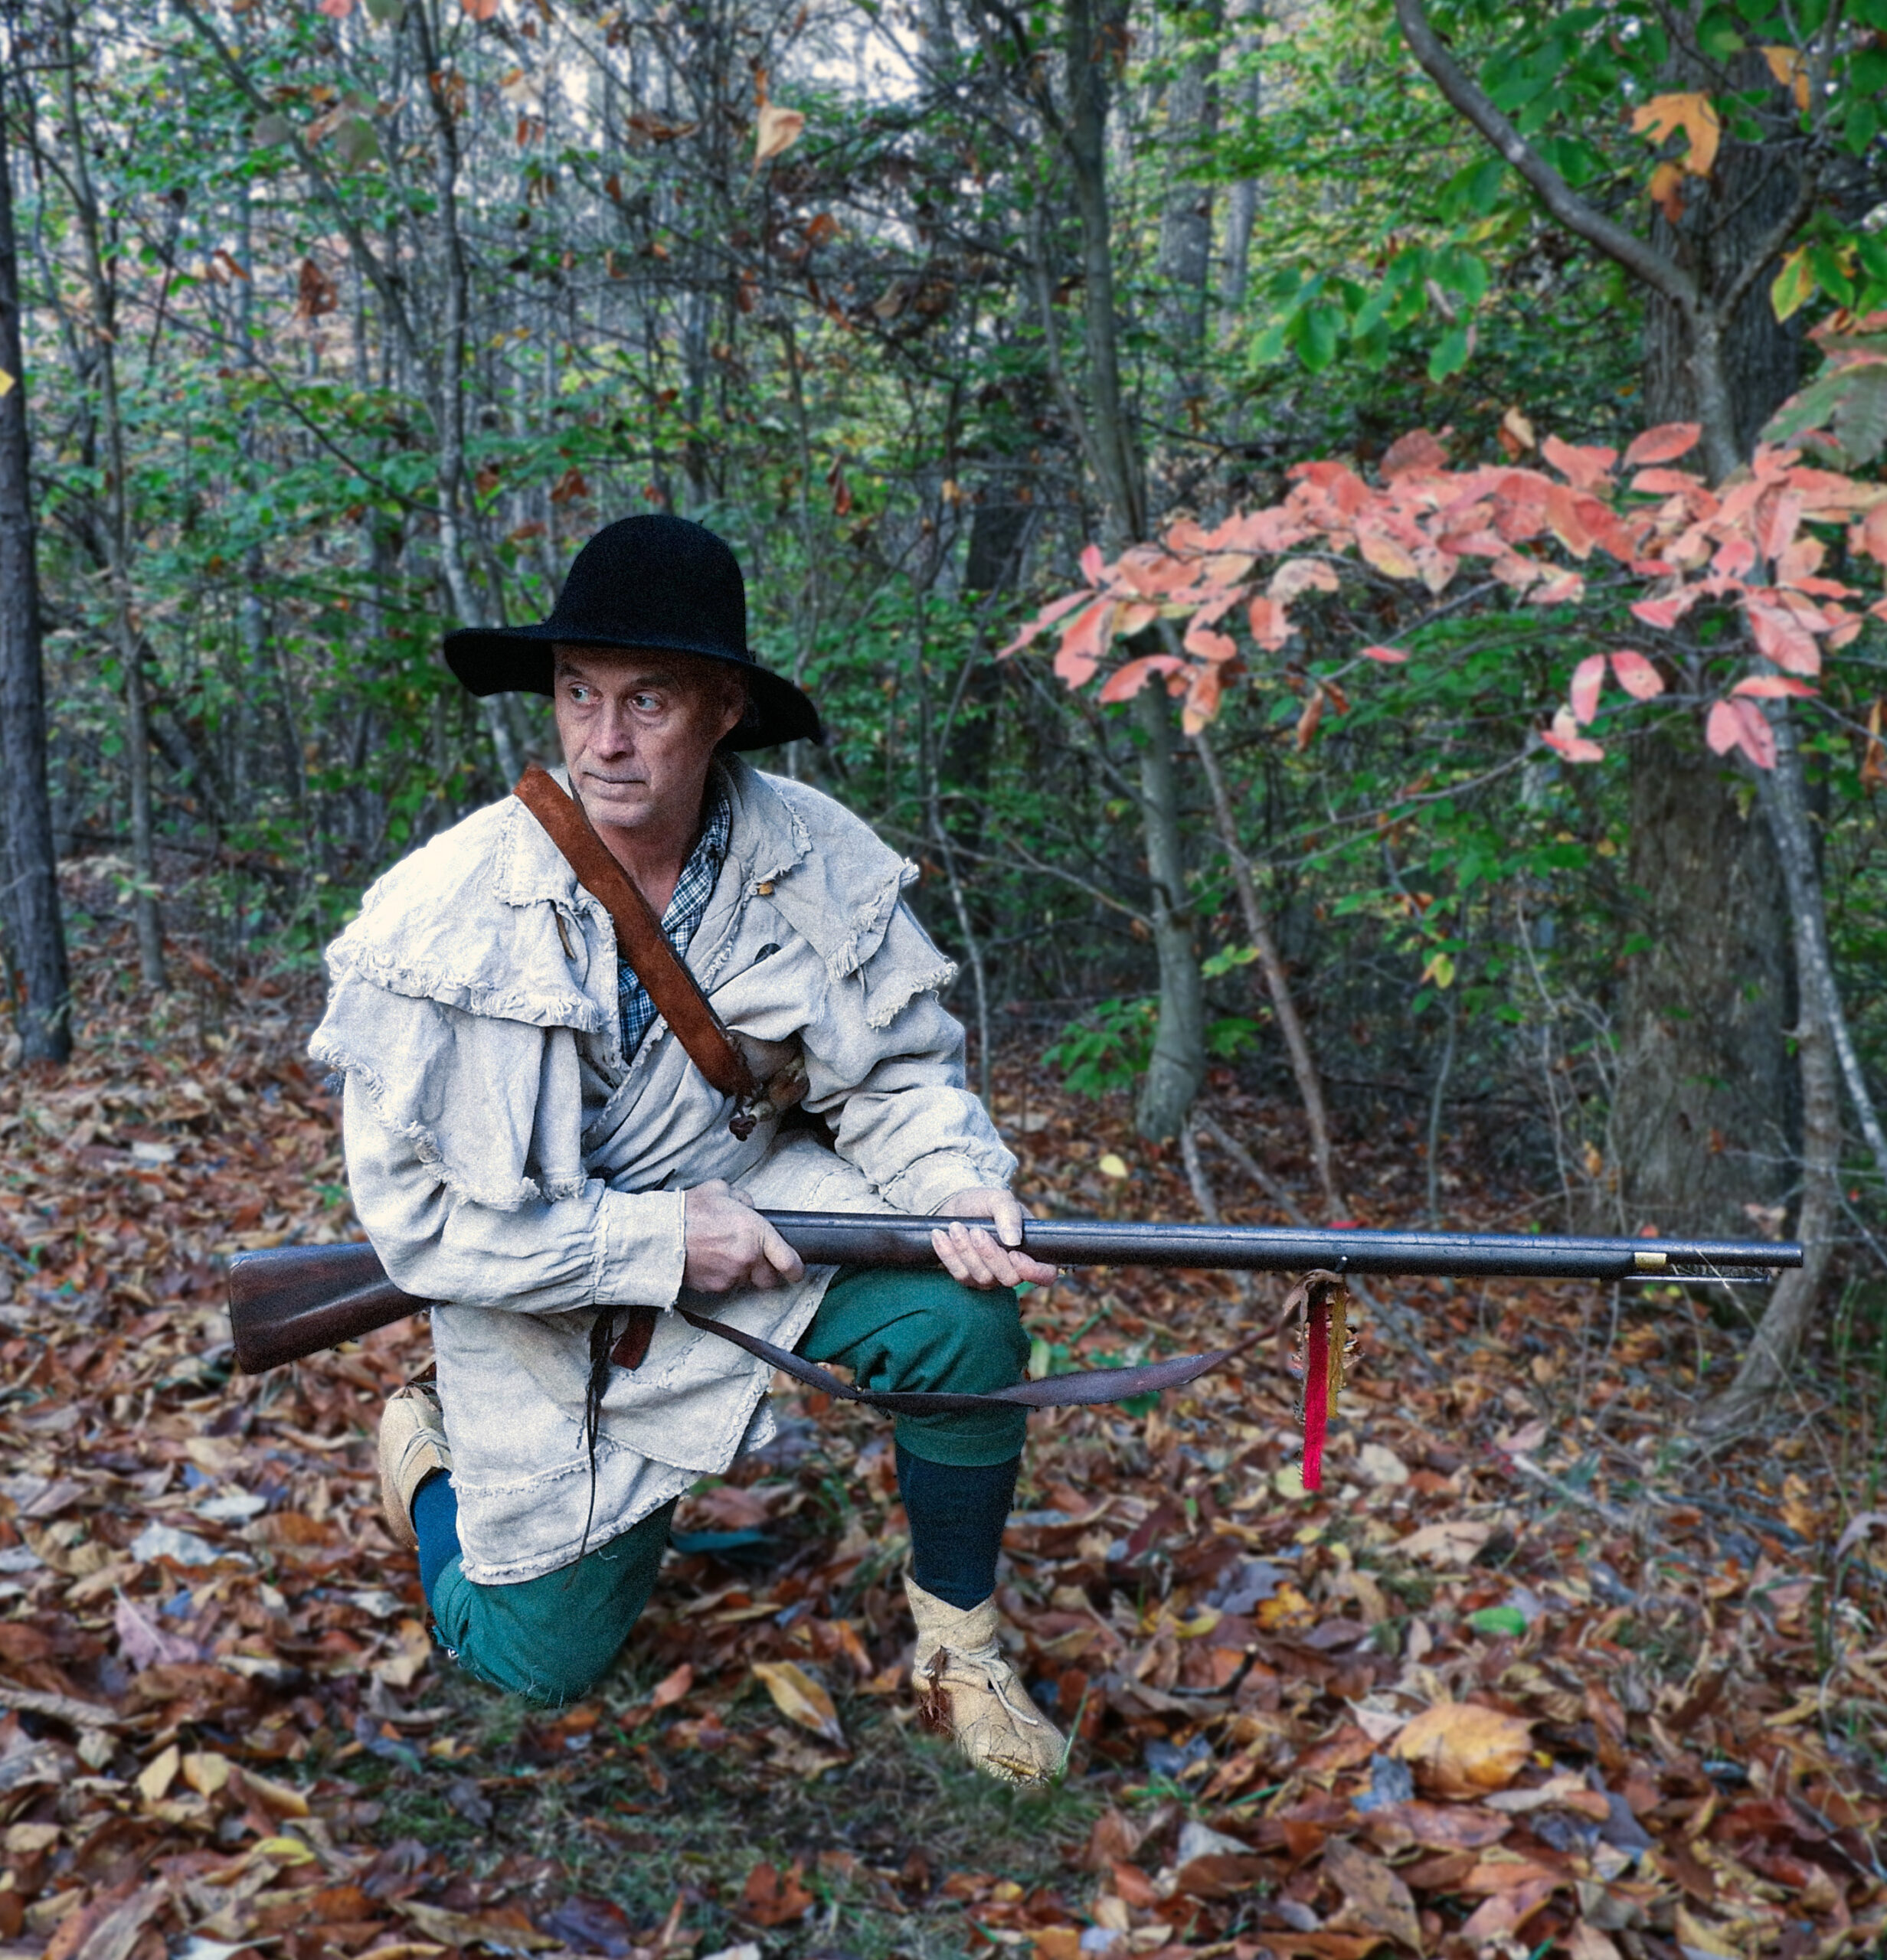 Doug Wood as Thomas Ingles, dressed as a 1700s hunter in the woods with a musket, wearing a black hat, off-white jacket, green britches, and beige shoes